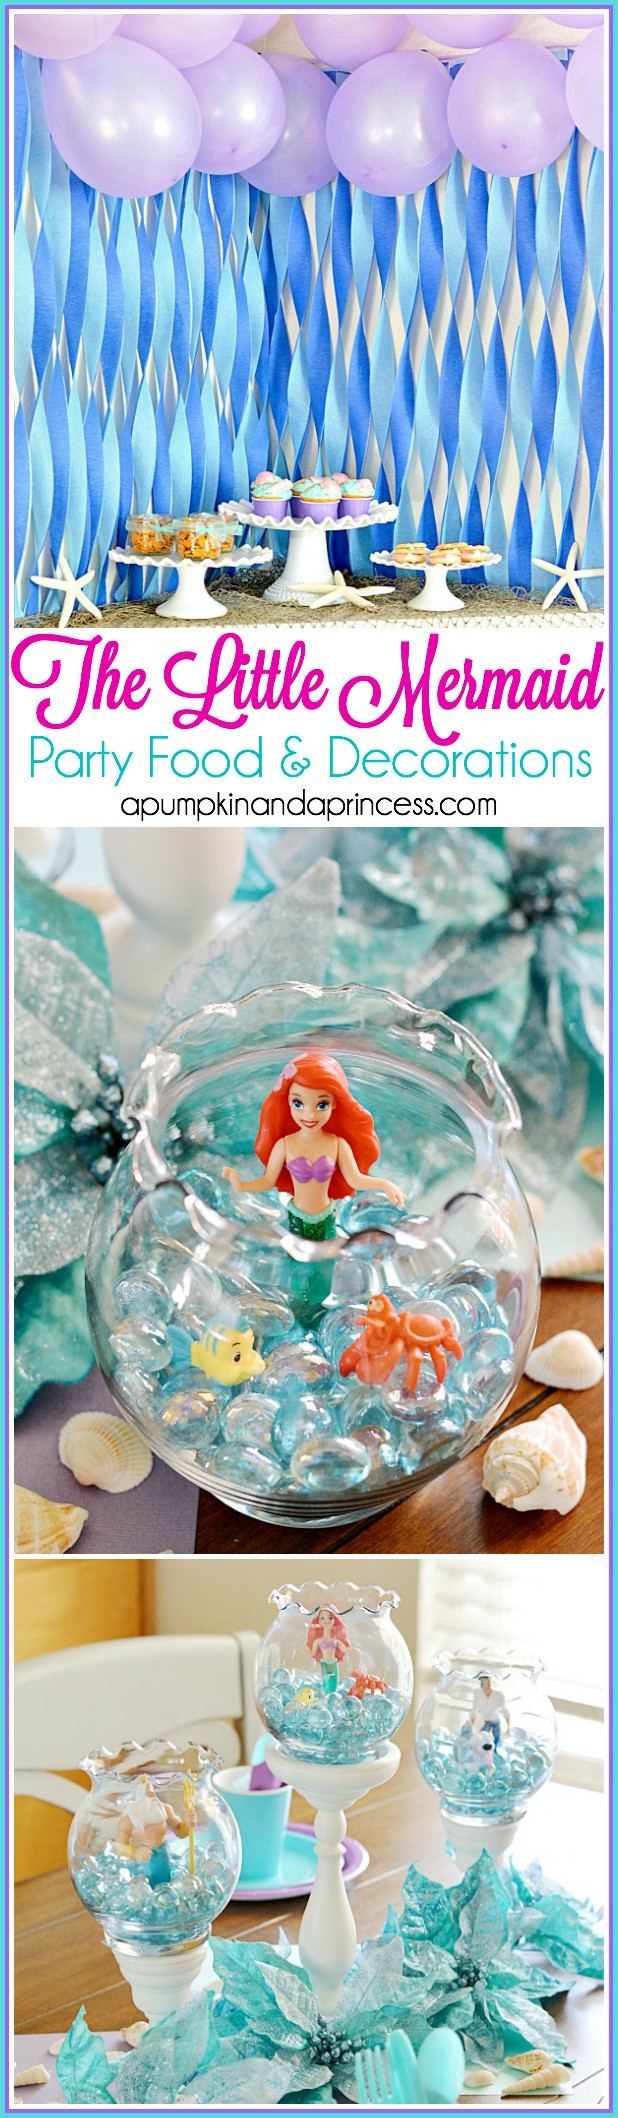 Little Mermaid Birthday Party Ideas
 The Little Mermaid Party A Pumpkin And A Princess